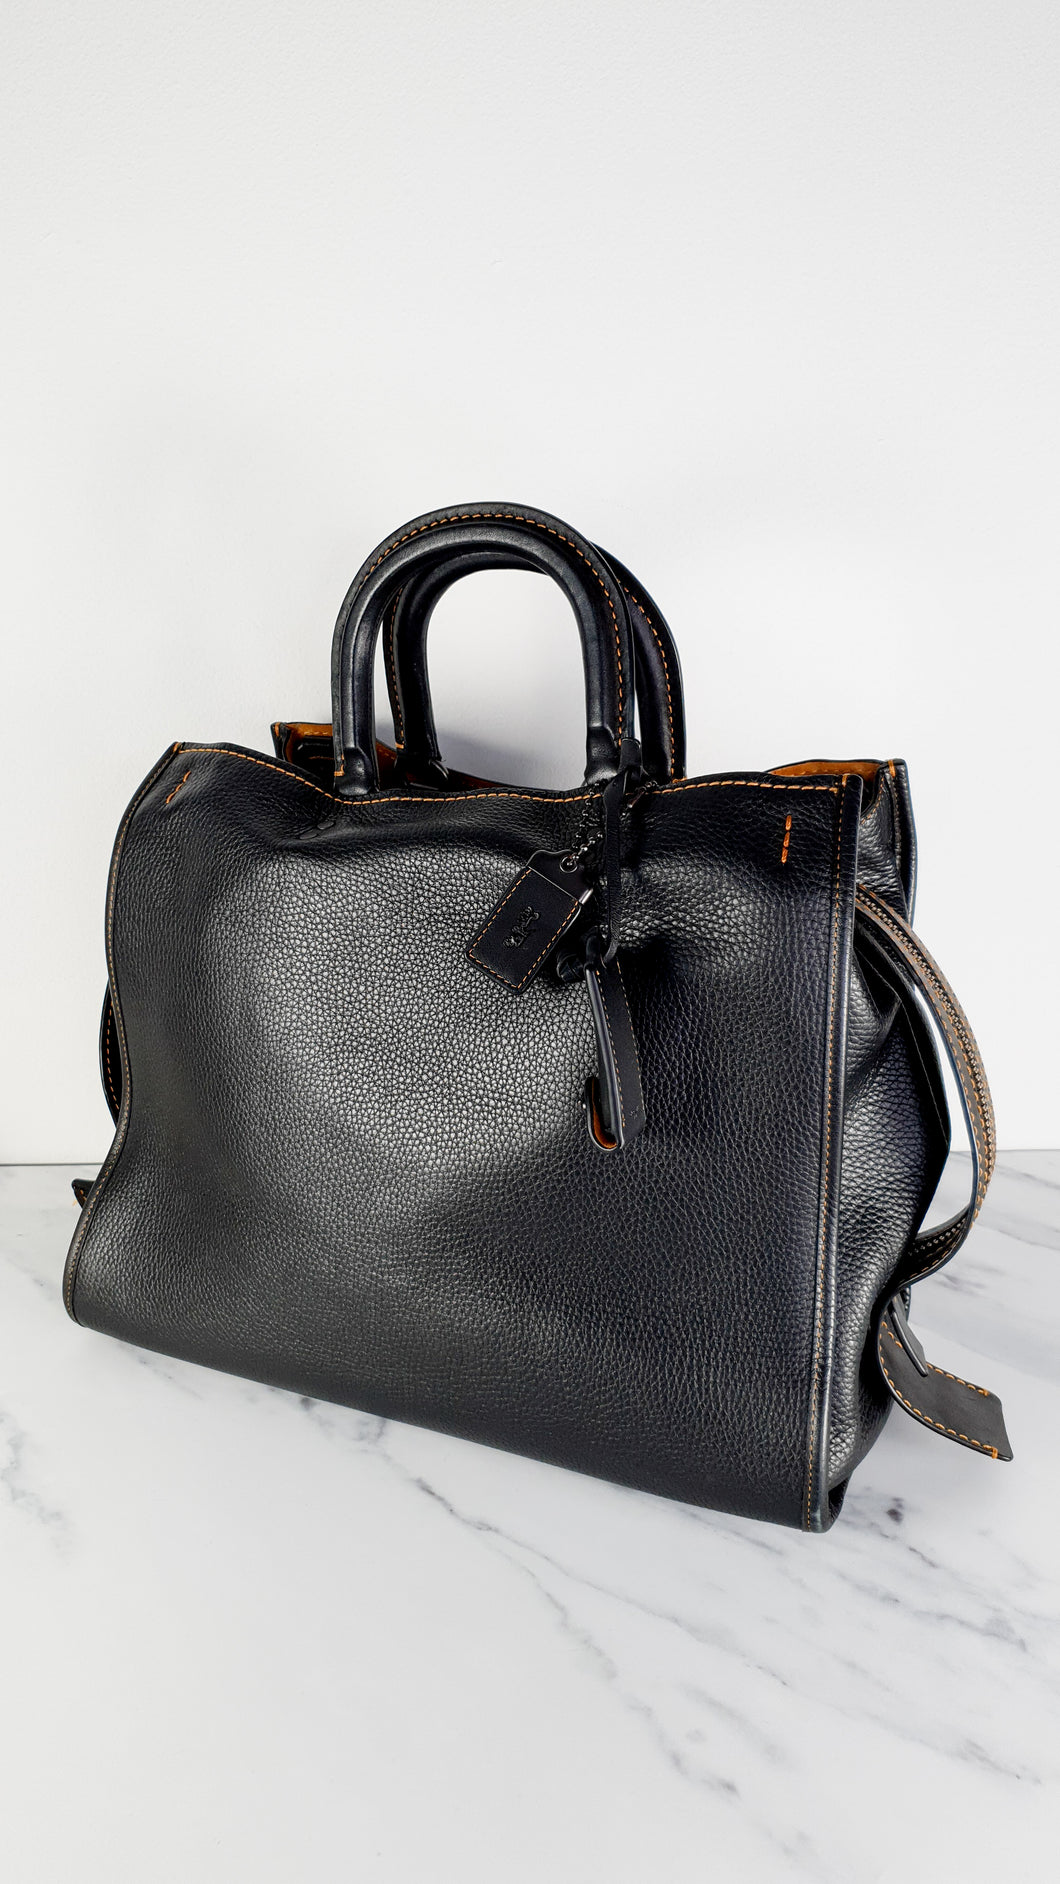 Coach 1941 Rogue 36 in Black Pebble Leather with Honey Suede Shoulder Bag - Coach 54556